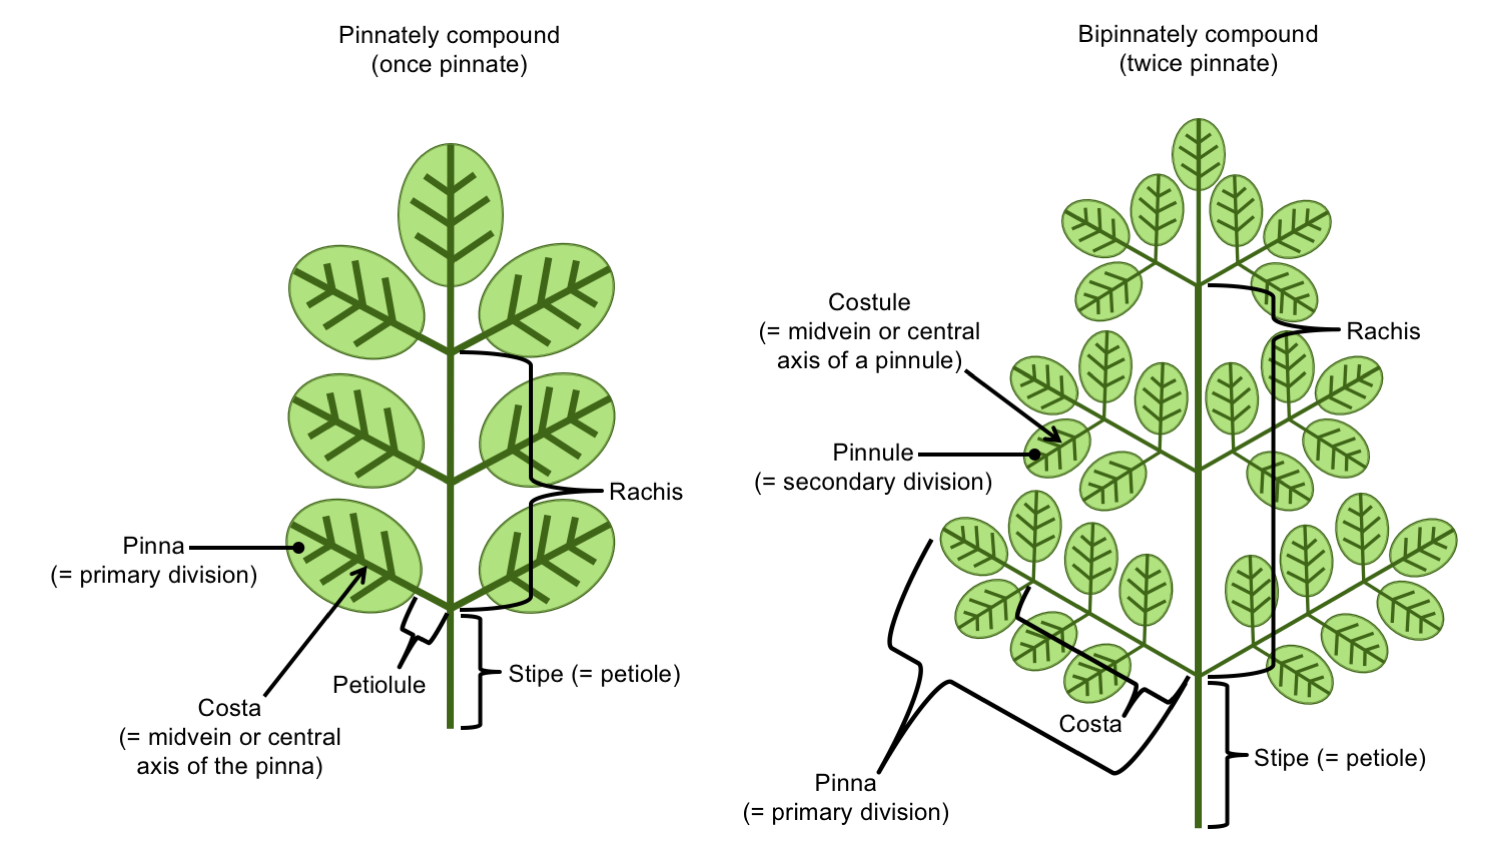 Diagrams showing a pinnately compound and bipinnately compound leaf labelled using terminology for ferns.